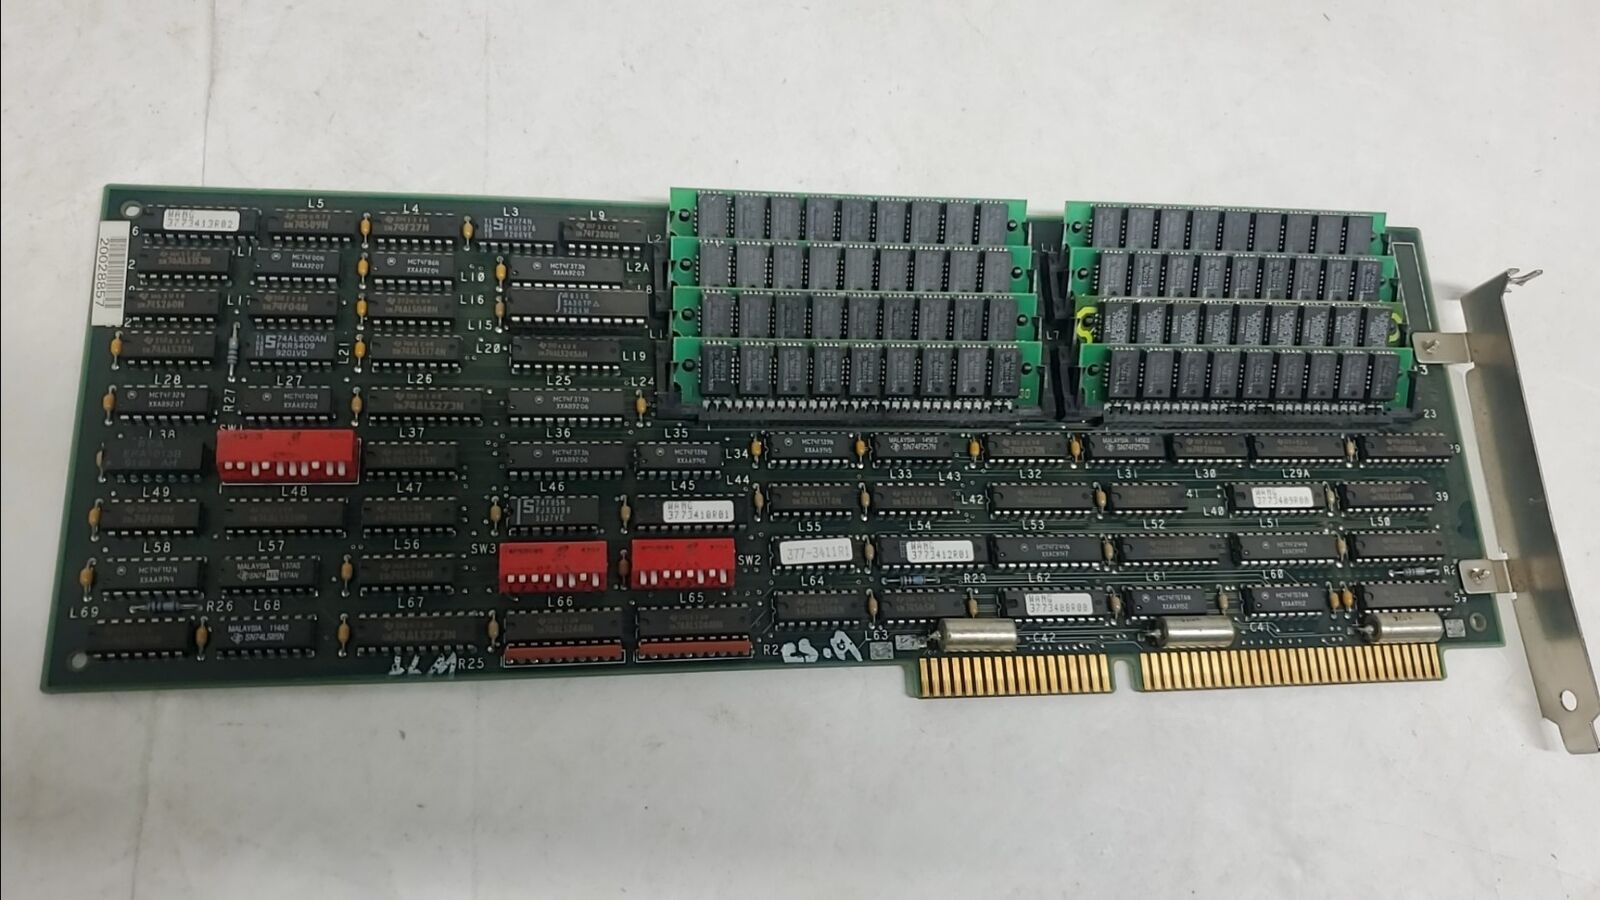 9453-4 20028857 WANG 16BIT ISA RAM EXPANSION BOARD (FULLY POPULATED) PULLED FROM